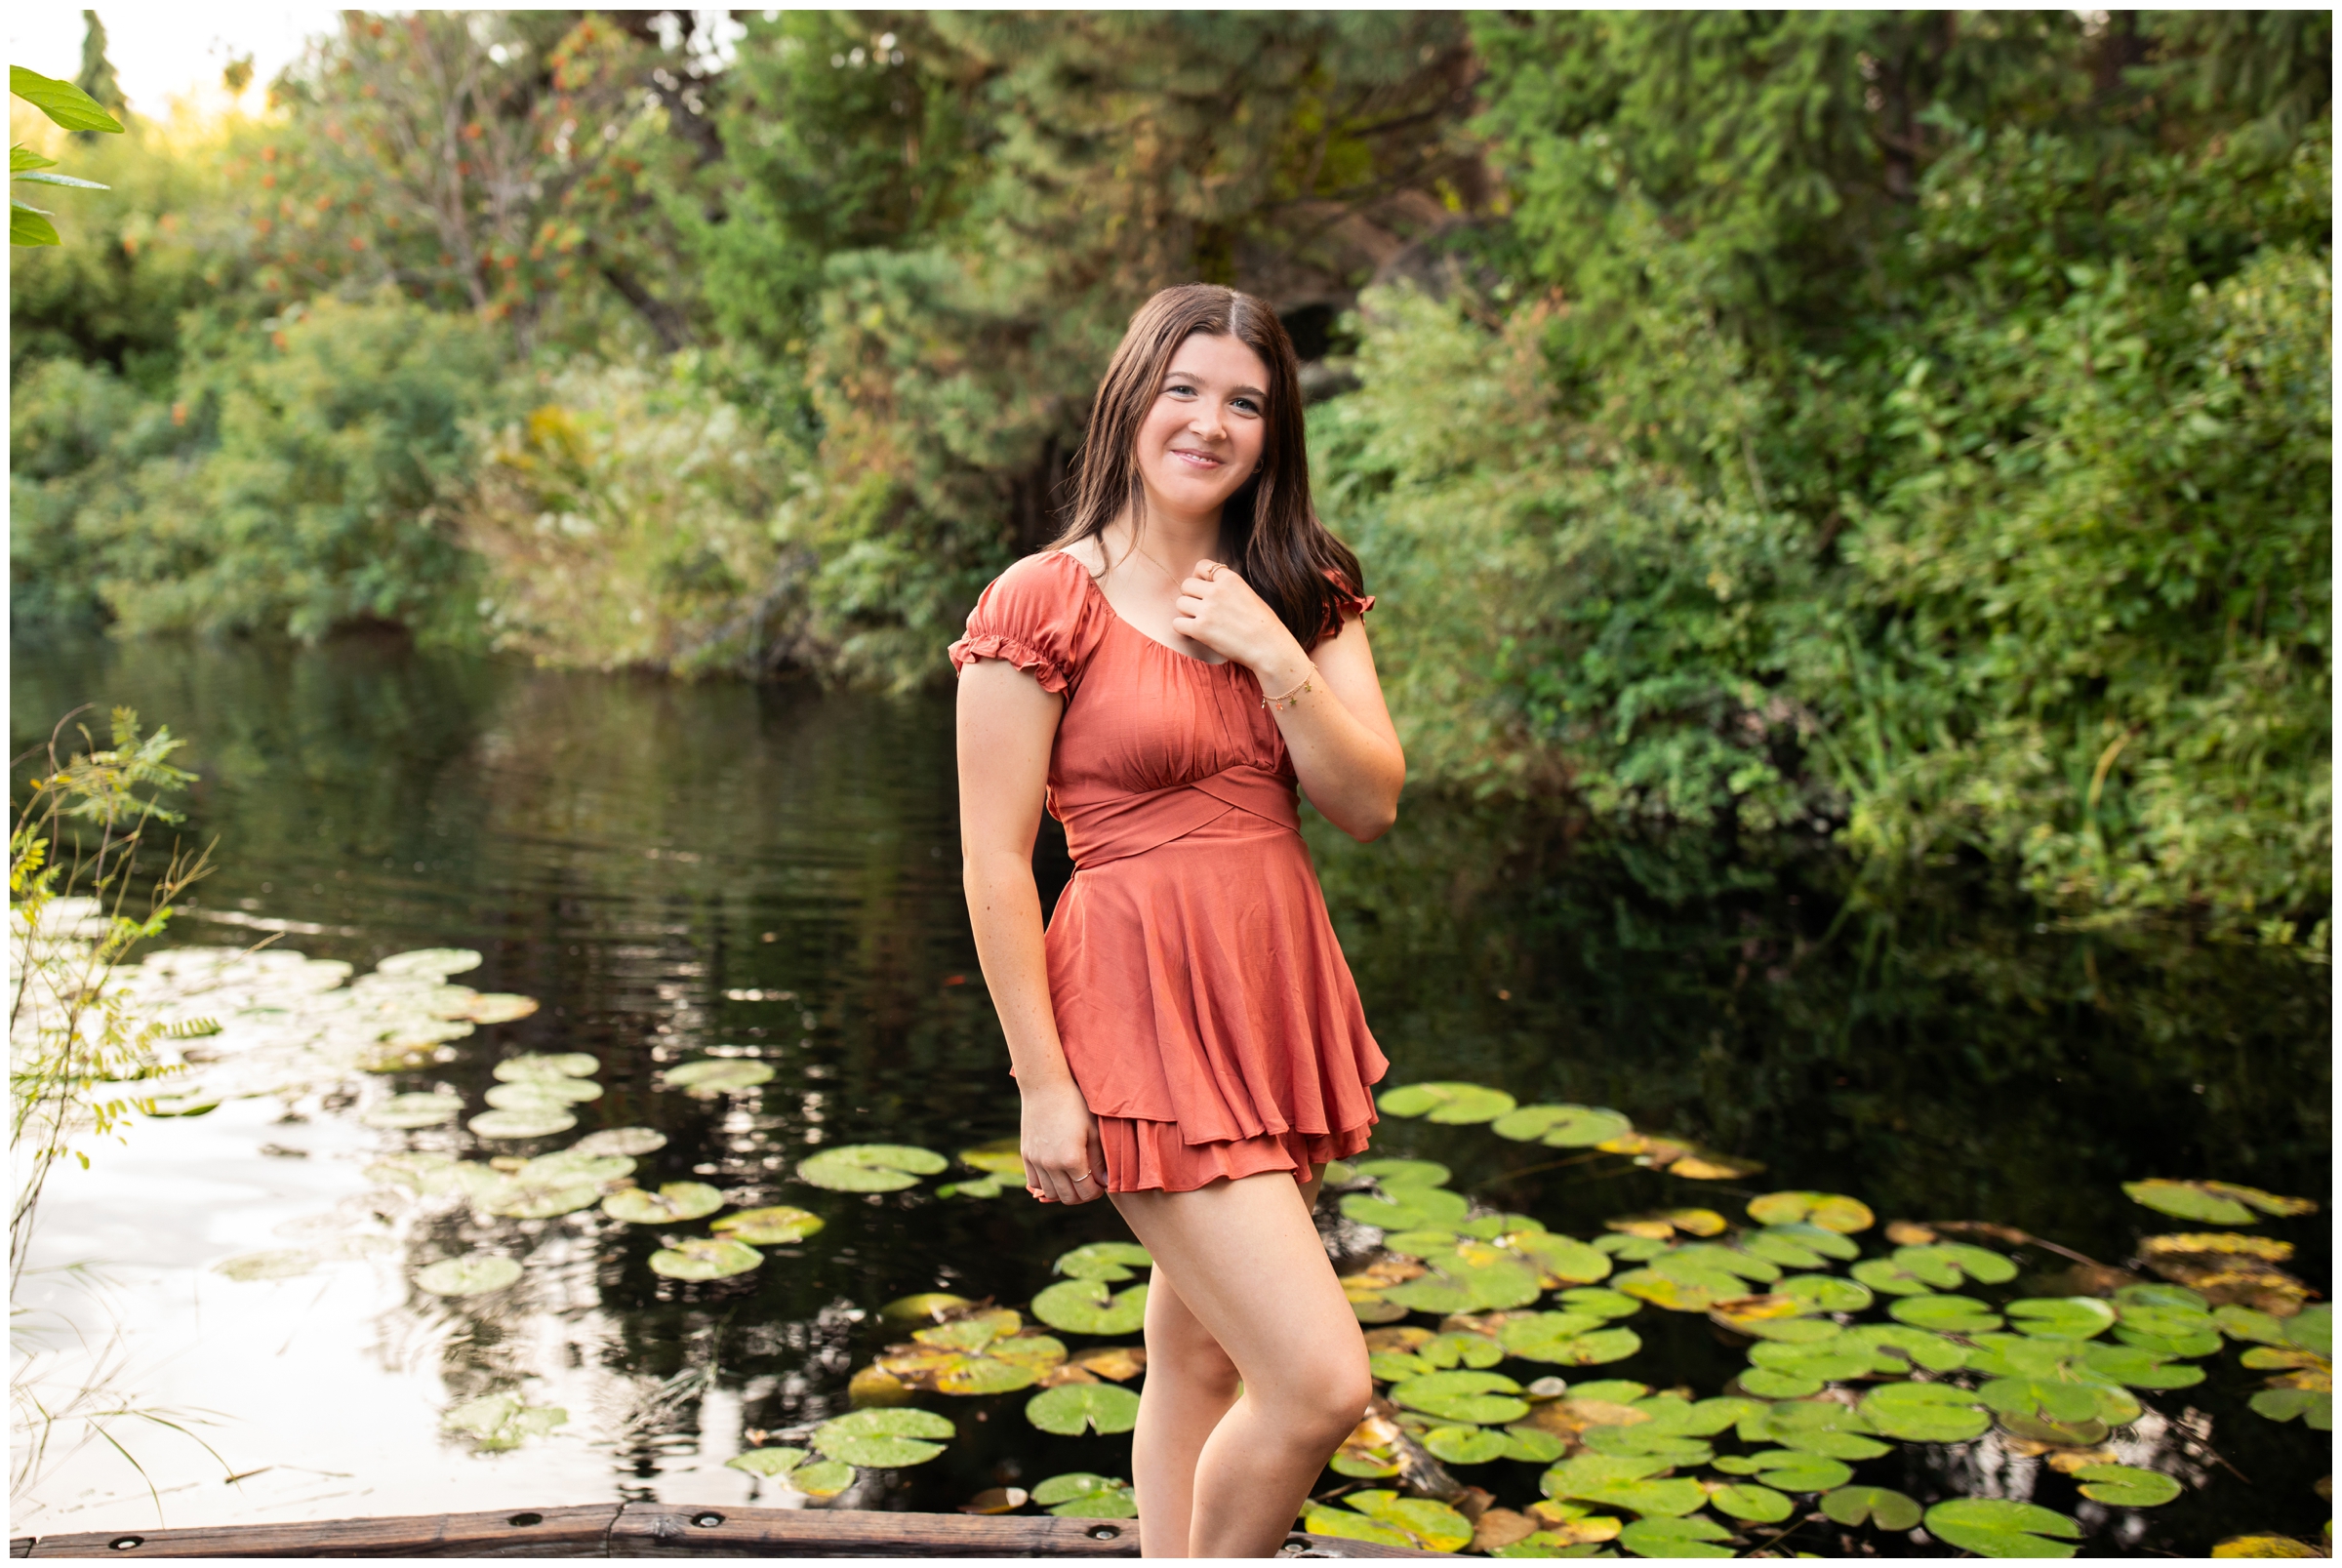 high school graduation photography session next to a lily pond in Colorado by Plum Pretty Photography 